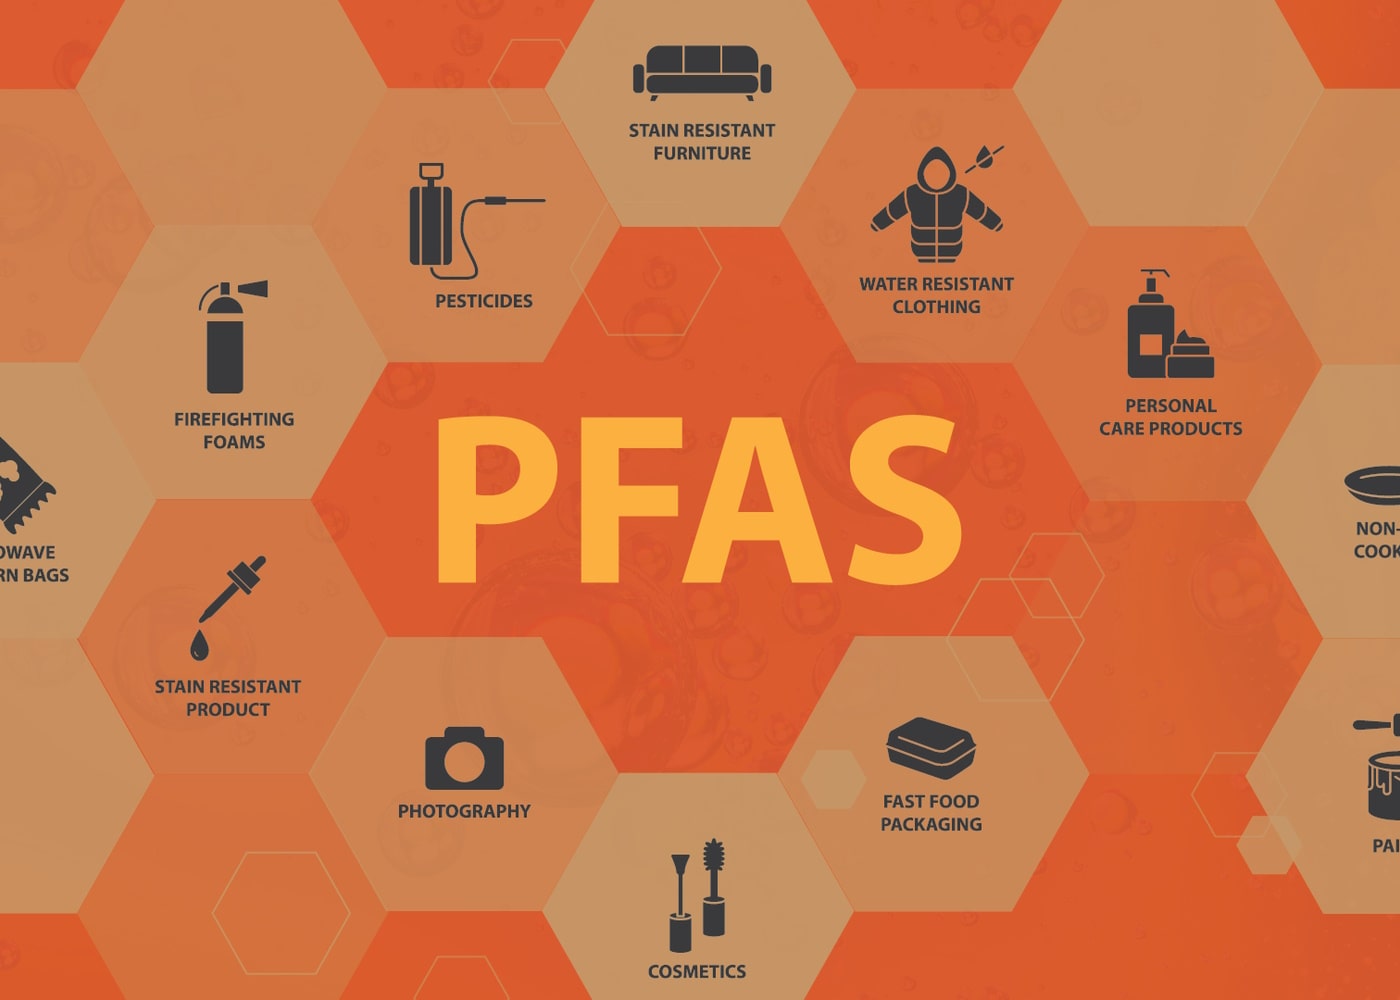 NAEM Webinar Managing Risks Associated with PFAS Impacted Materials Under Increasingly Stringent Federal and State Regulations